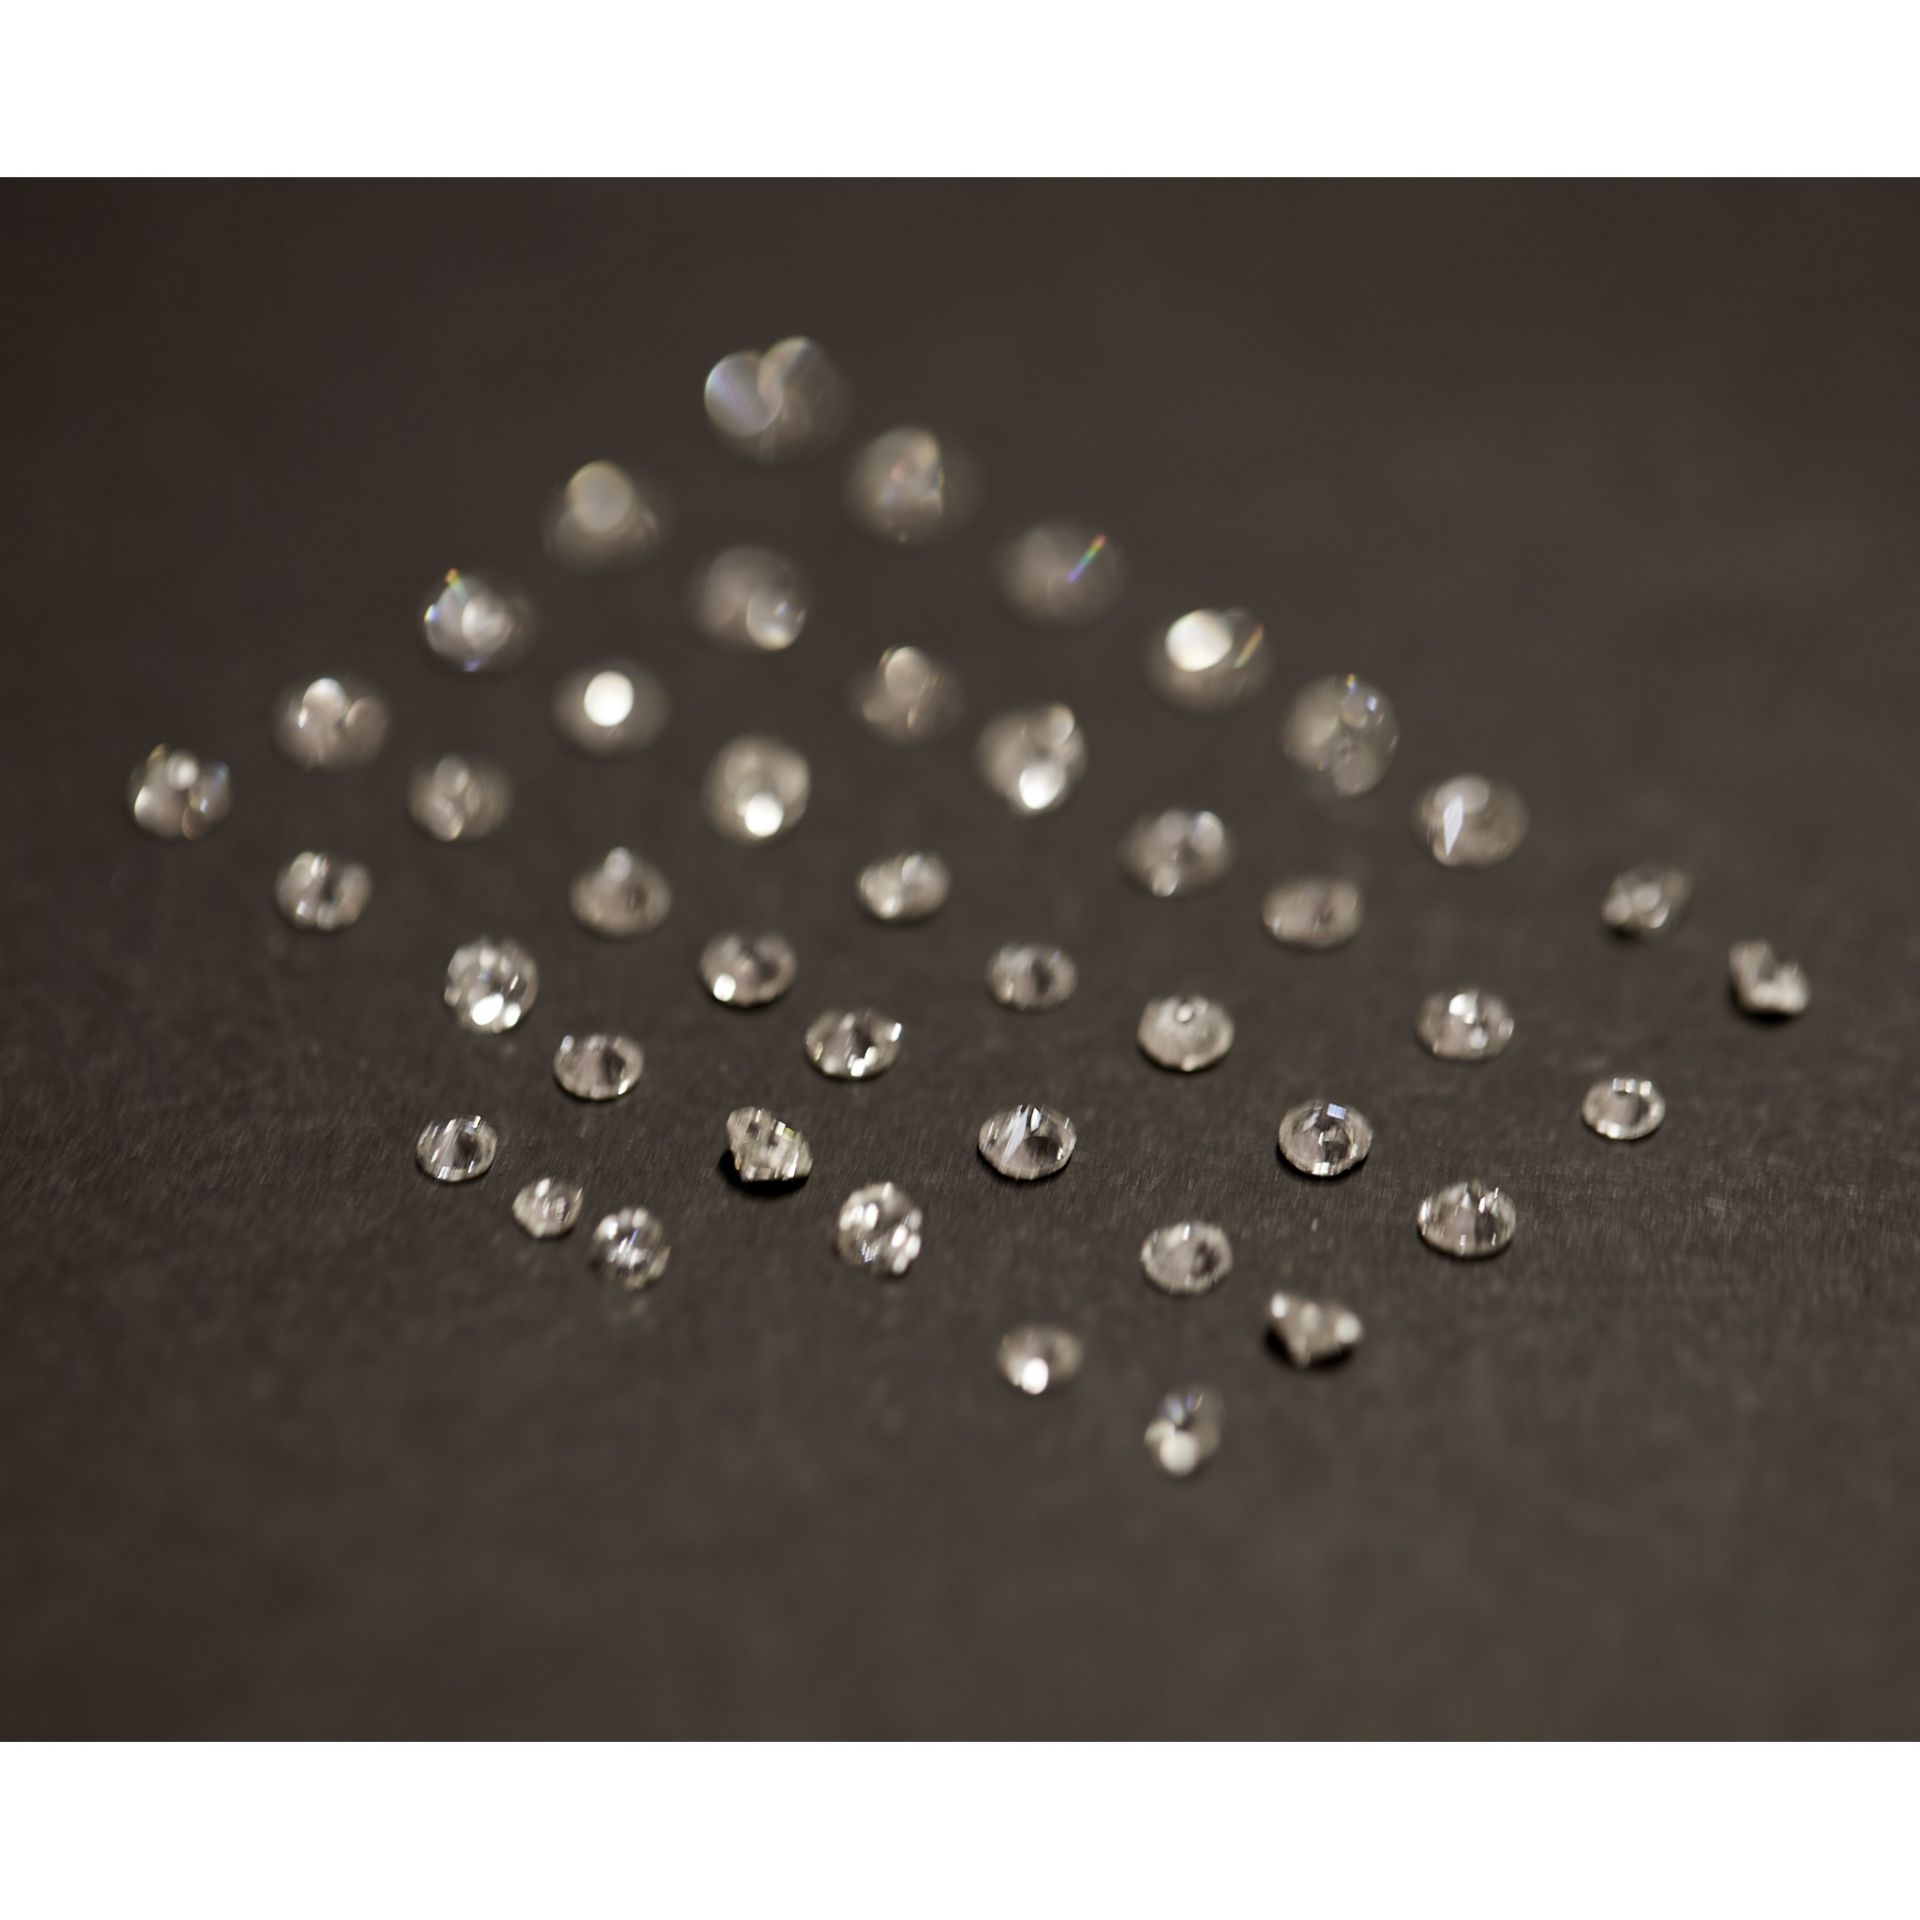 A collection of small loose diamonds - Image 4 of 4